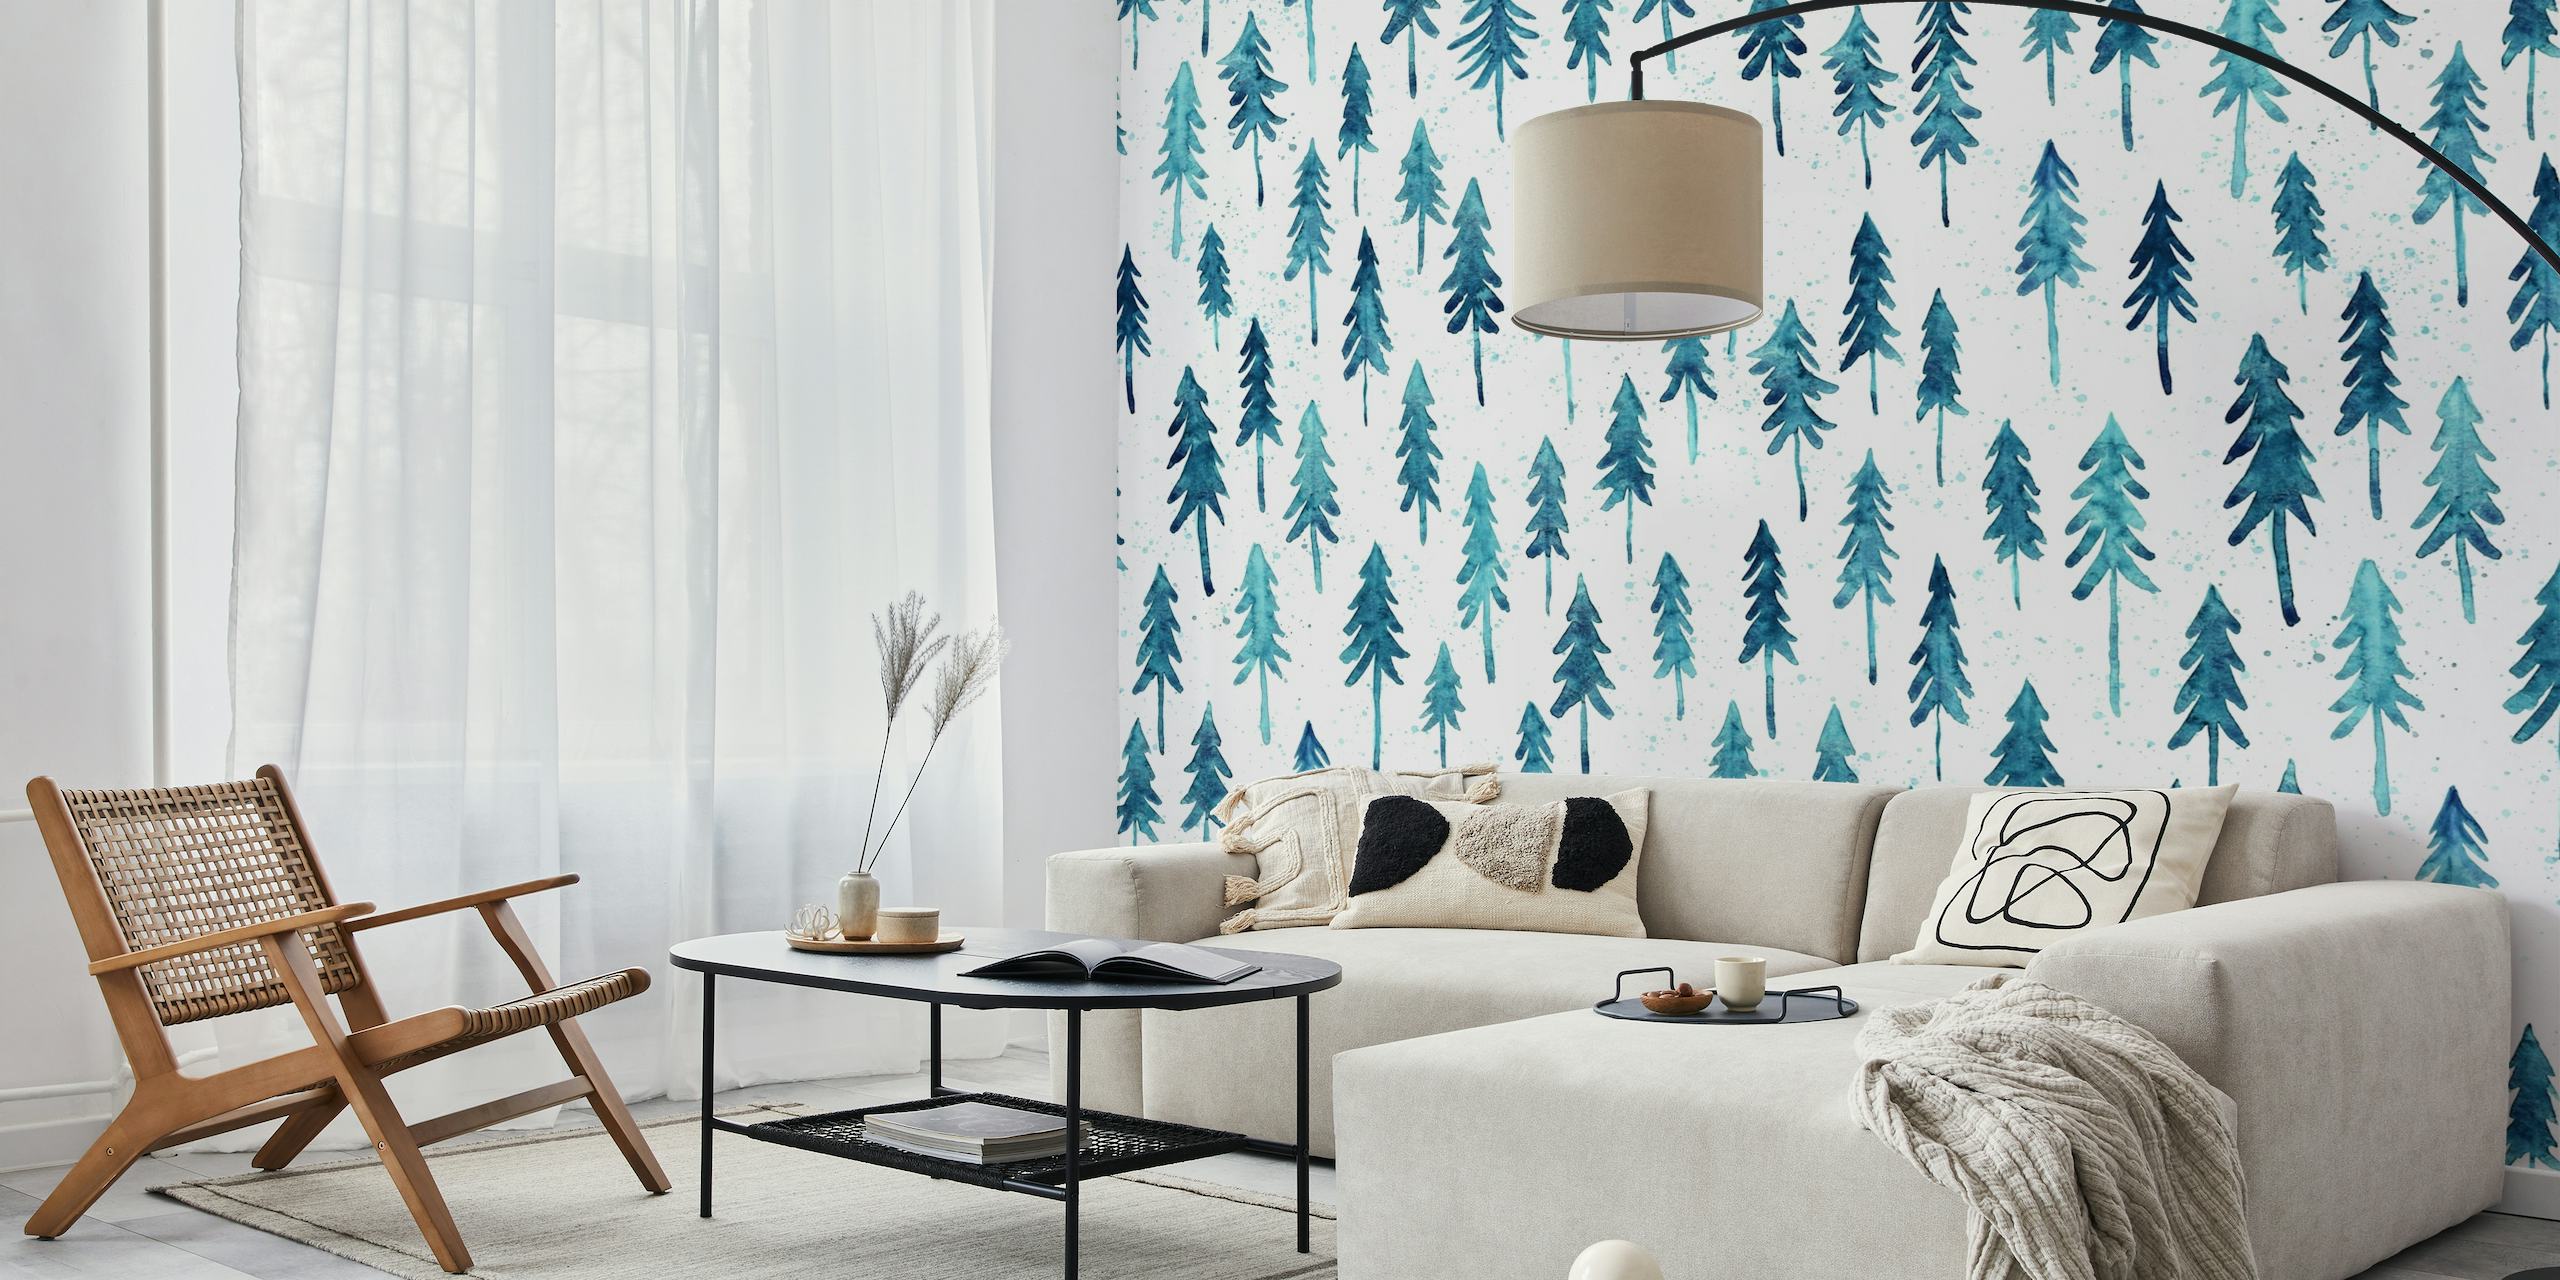 Watercolor blue pine trees wall mural with a pattern of hand-painted style evergreens